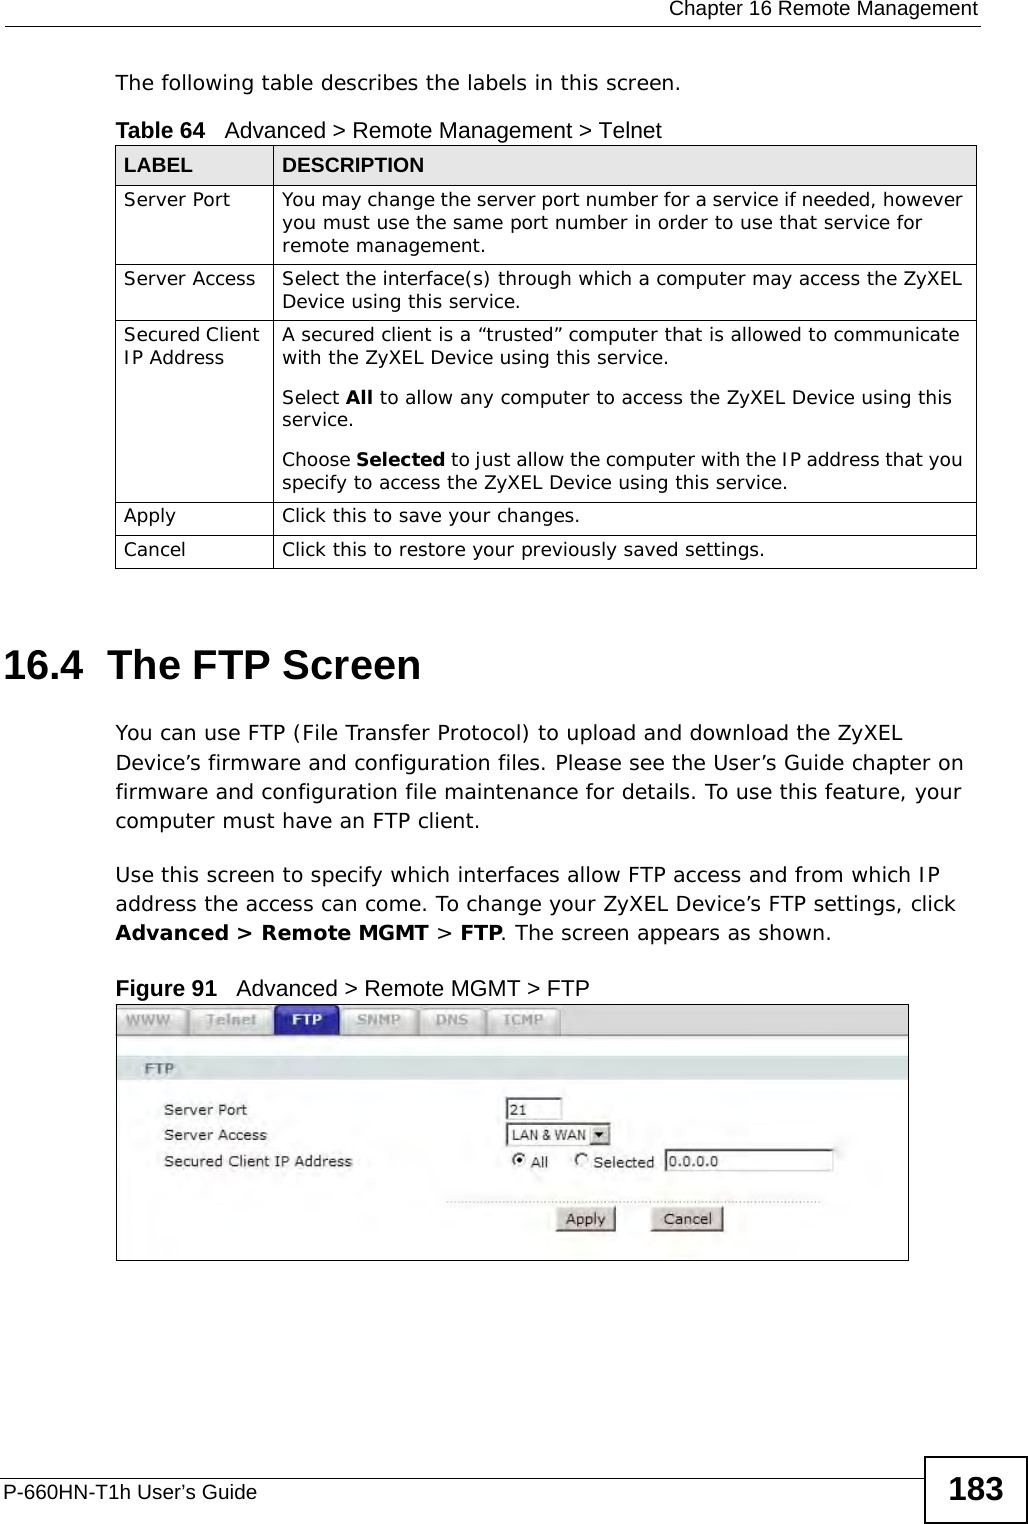  Chapter 16 Remote ManagementP-660HN-T1h User’s Guide 183The following table describes the labels in this screen.16.4  The FTP Screen You can use FTP (File Transfer Protocol) to upload and download the ZyXEL Device’s firmware and configuration files. Please see the User’s Guide chapter on firmware and configuration file maintenance for details. To use this feature, your computer must have an FTP client.Use this screen to specify which interfaces allow FTP access and from which IP address the access can come. To change your ZyXEL Device’s FTP settings, click Advanced &gt; Remote MGMT &gt; FTP. The screen appears as shown.Figure 91   Advanced &gt; Remote MGMT &gt; FTPTable 64   Advanced &gt; Remote Management &gt; TelnetLABEL DESCRIPTIONServer Port You may change the server port number for a service if needed, however you must use the same port number in order to use that service for remote management.Server Access Select the interface(s) through which a computer may access the ZyXEL Device using this service.Secured Client IP Address A secured client is a “trusted” computer that is allowed to communicate with the ZyXEL Device using this service. Select All to allow any computer to access the ZyXEL Device using this service.Choose Selected to just allow the computer with the IP address that you specify to access the ZyXEL Device using this service.Apply Click this to save your changes.Cancel Click this to restore your previously saved settings.